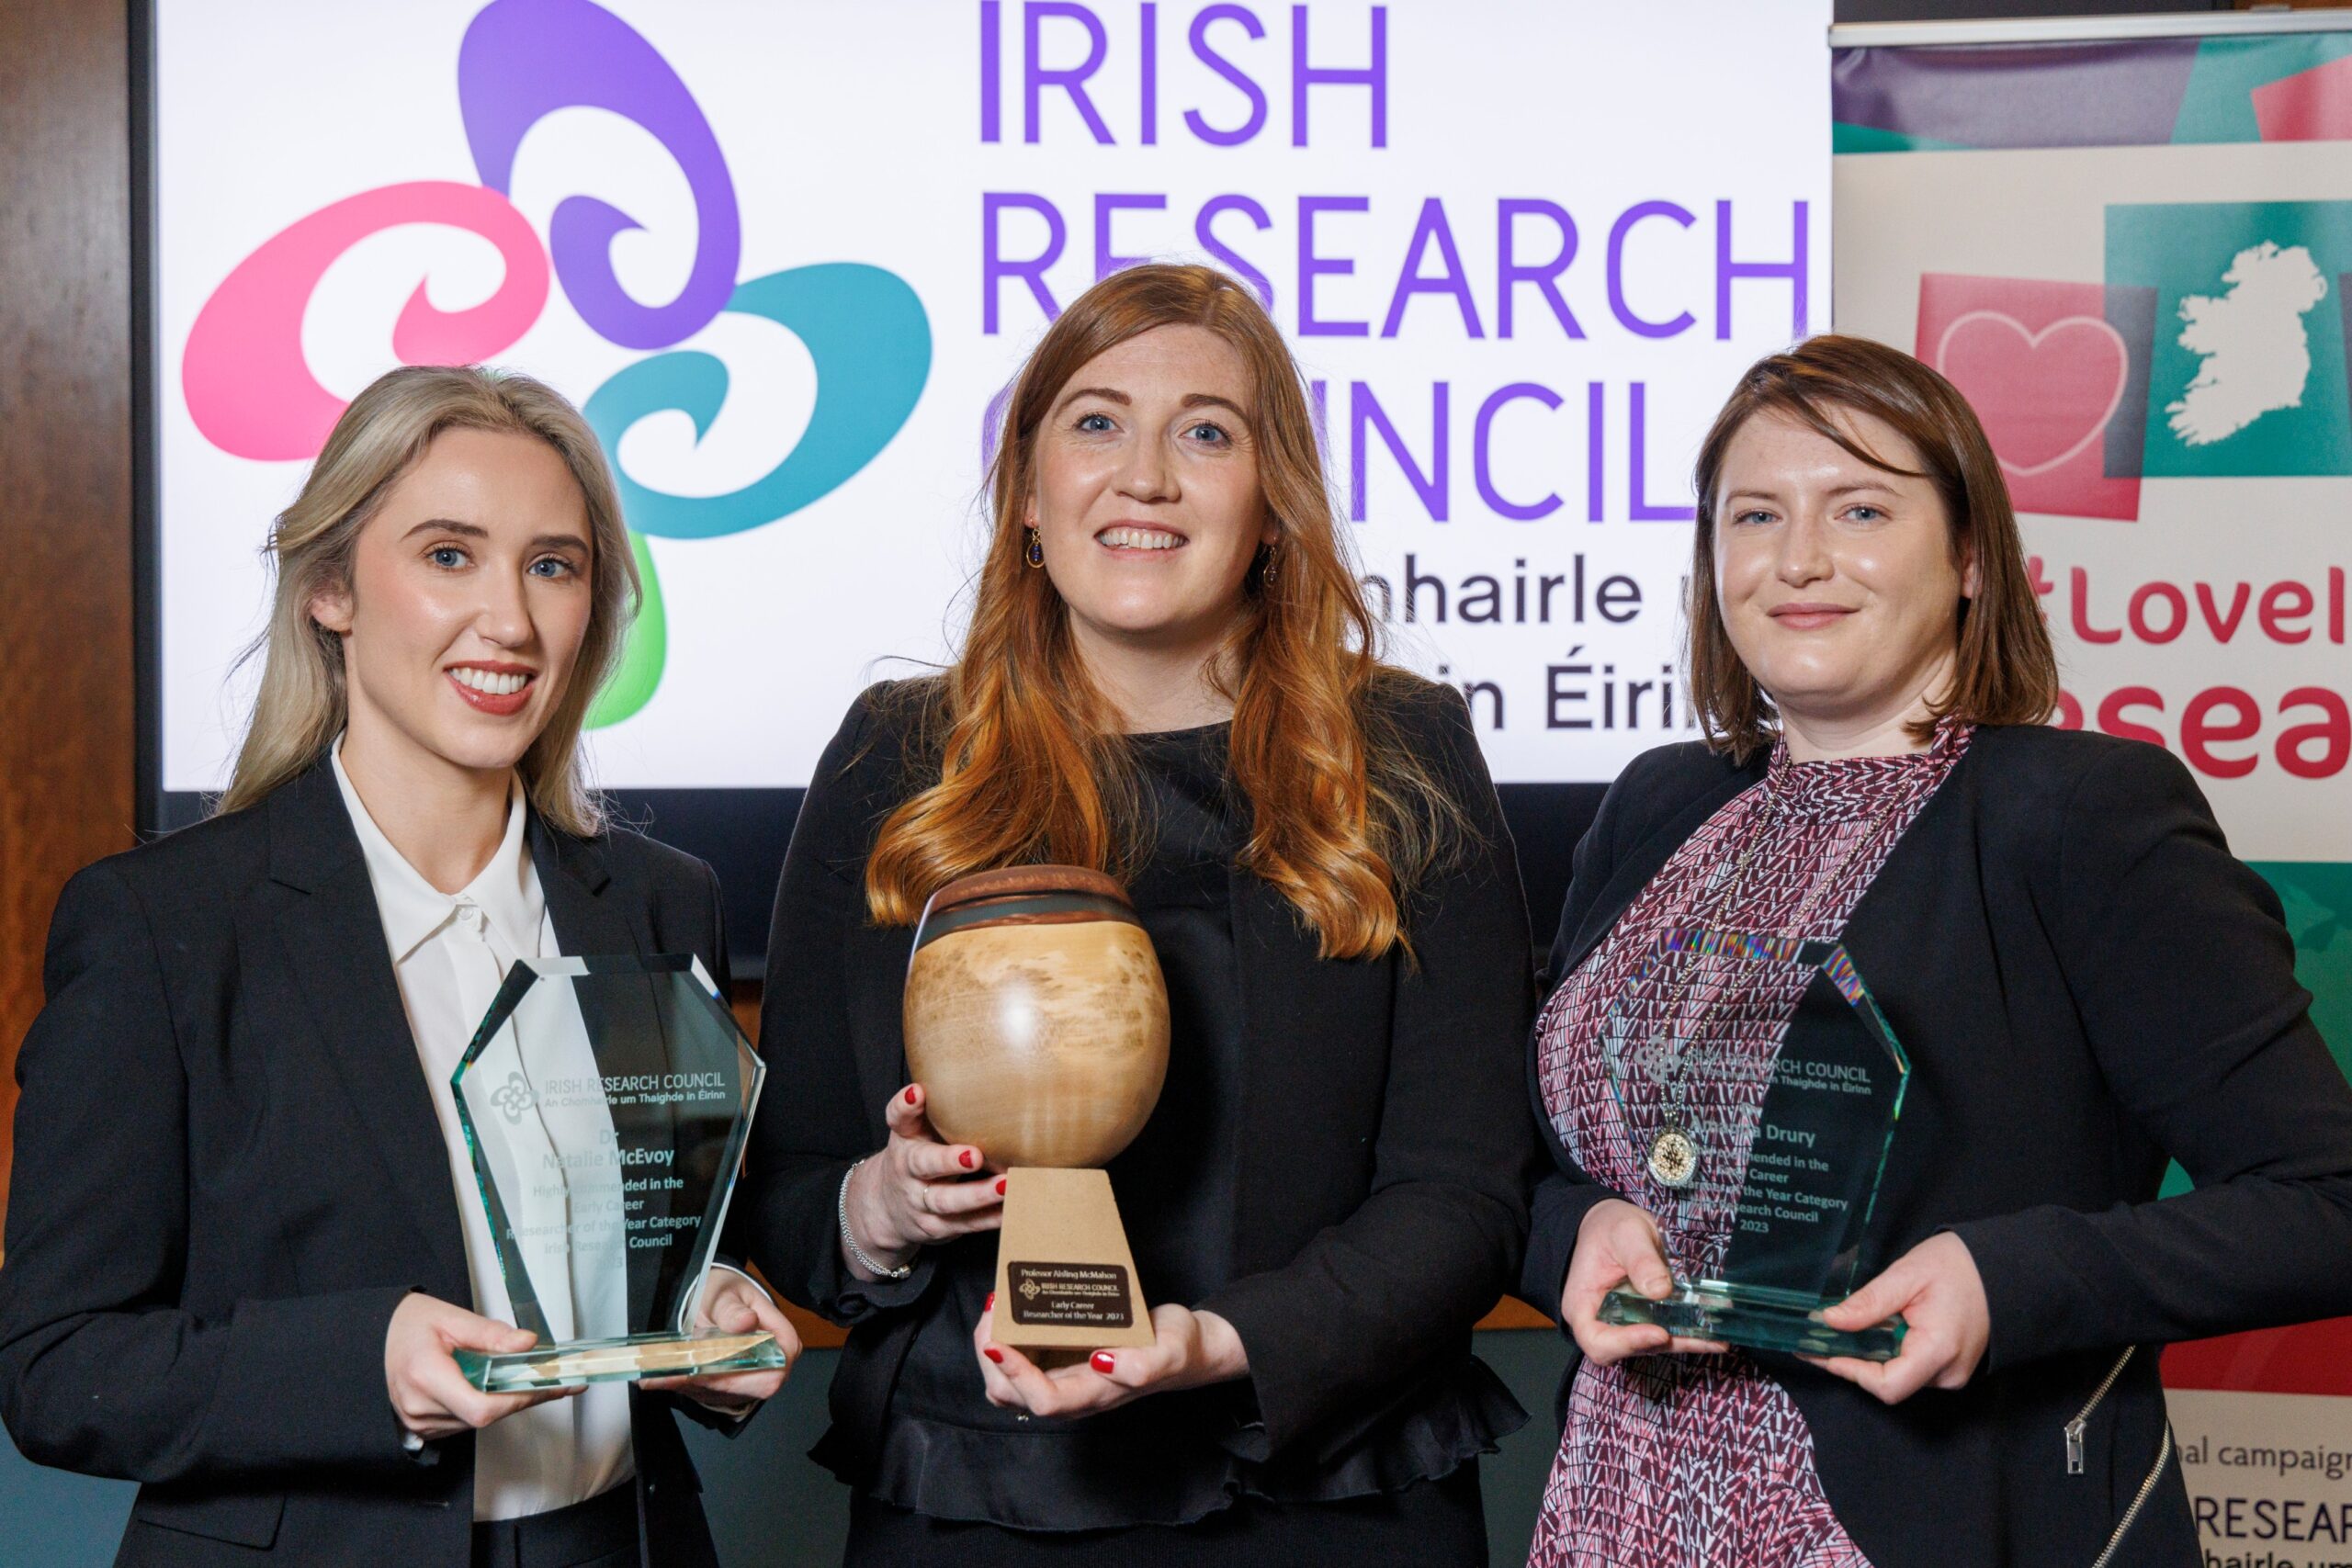 Professor Aisling McMahon, Dr Amanda Drury and Dr Natalie McEvoy pictured holding their trophies